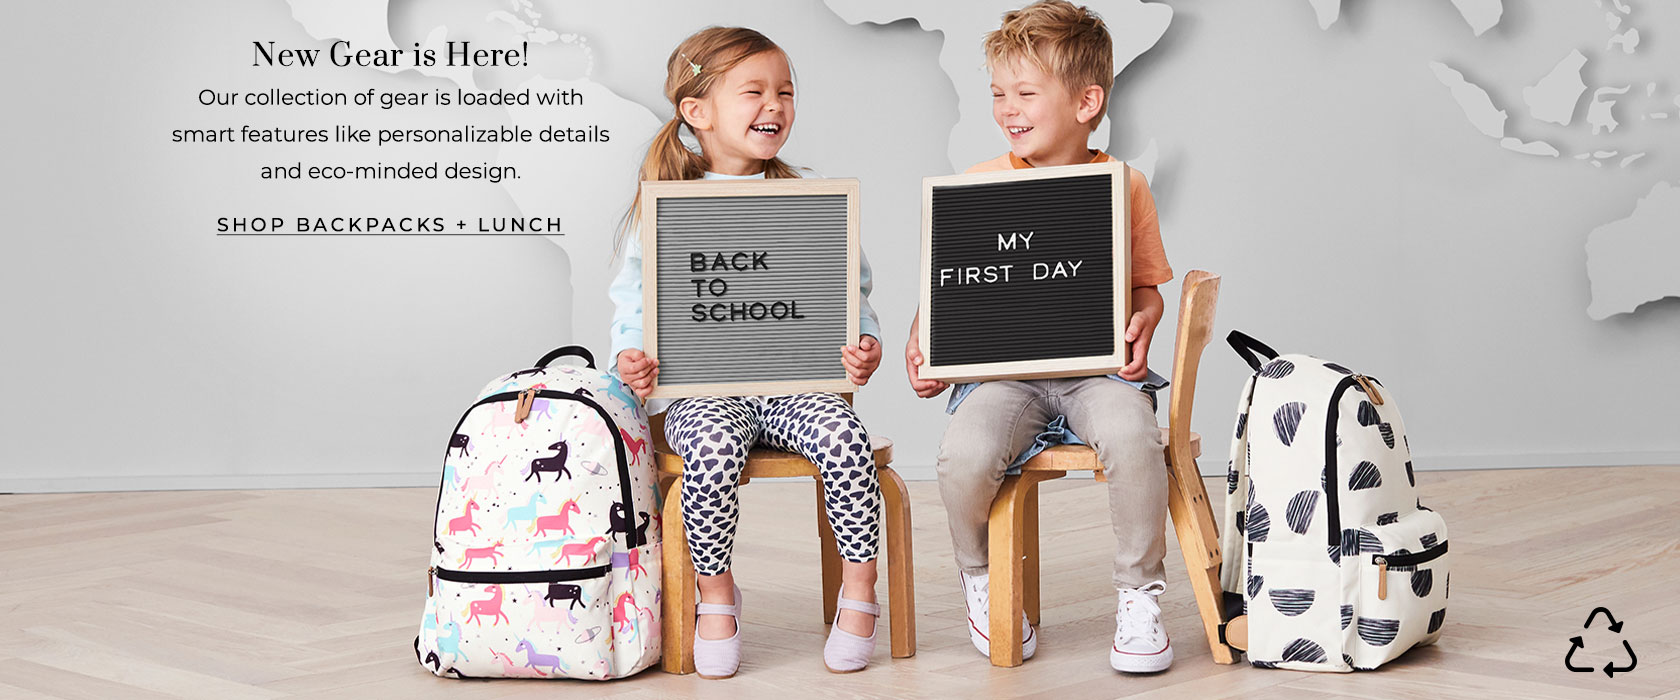 New Gear is Here! Shop Backpacks + Lunch